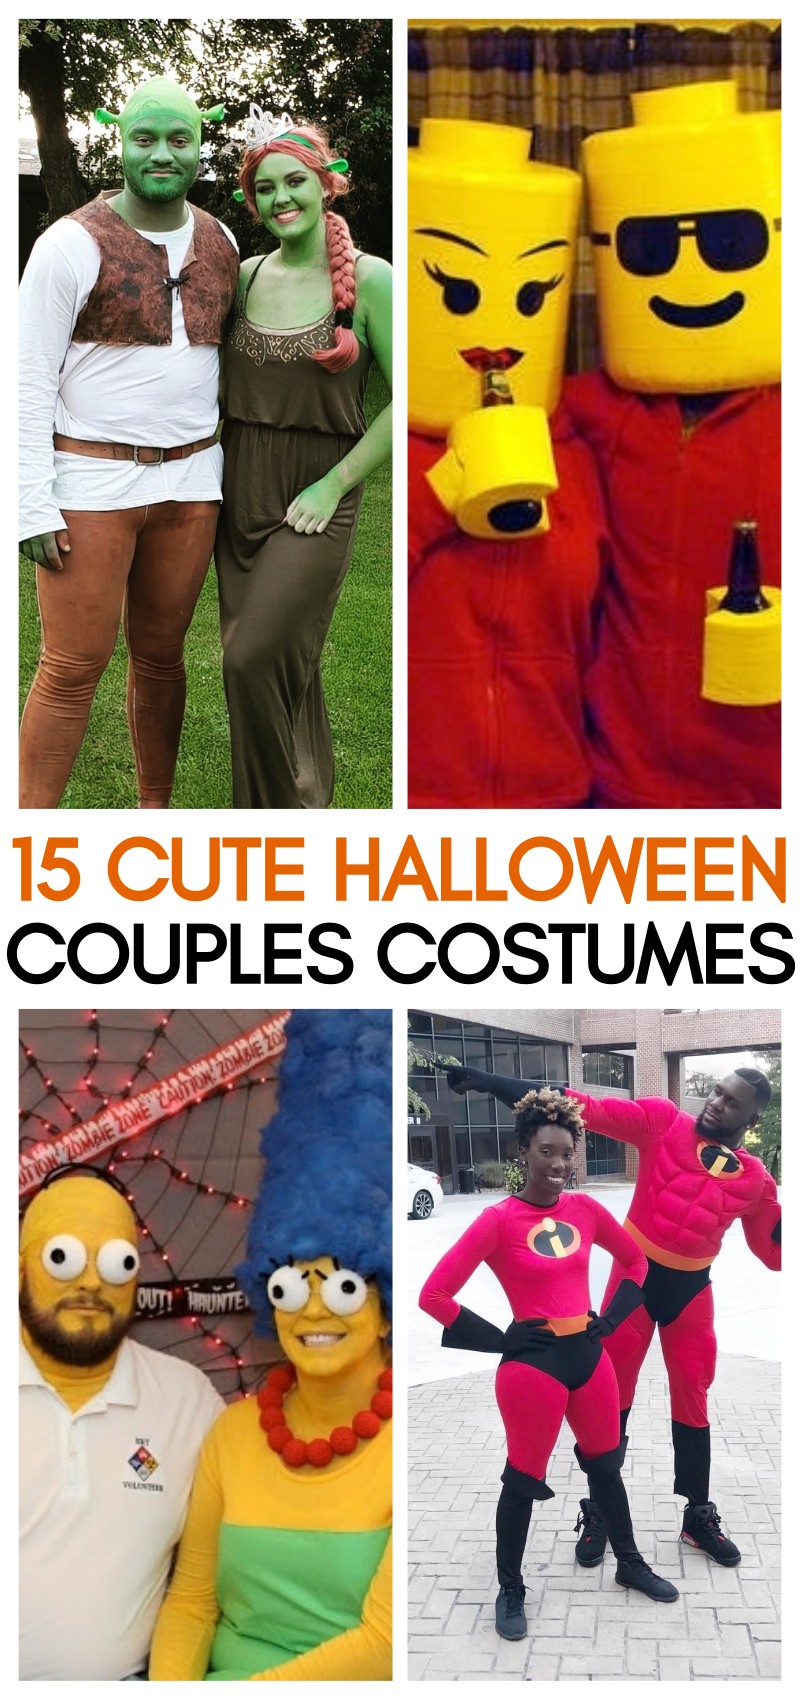 15 Cute Couples Costumes For Halloween Ideas These Are Brilliant